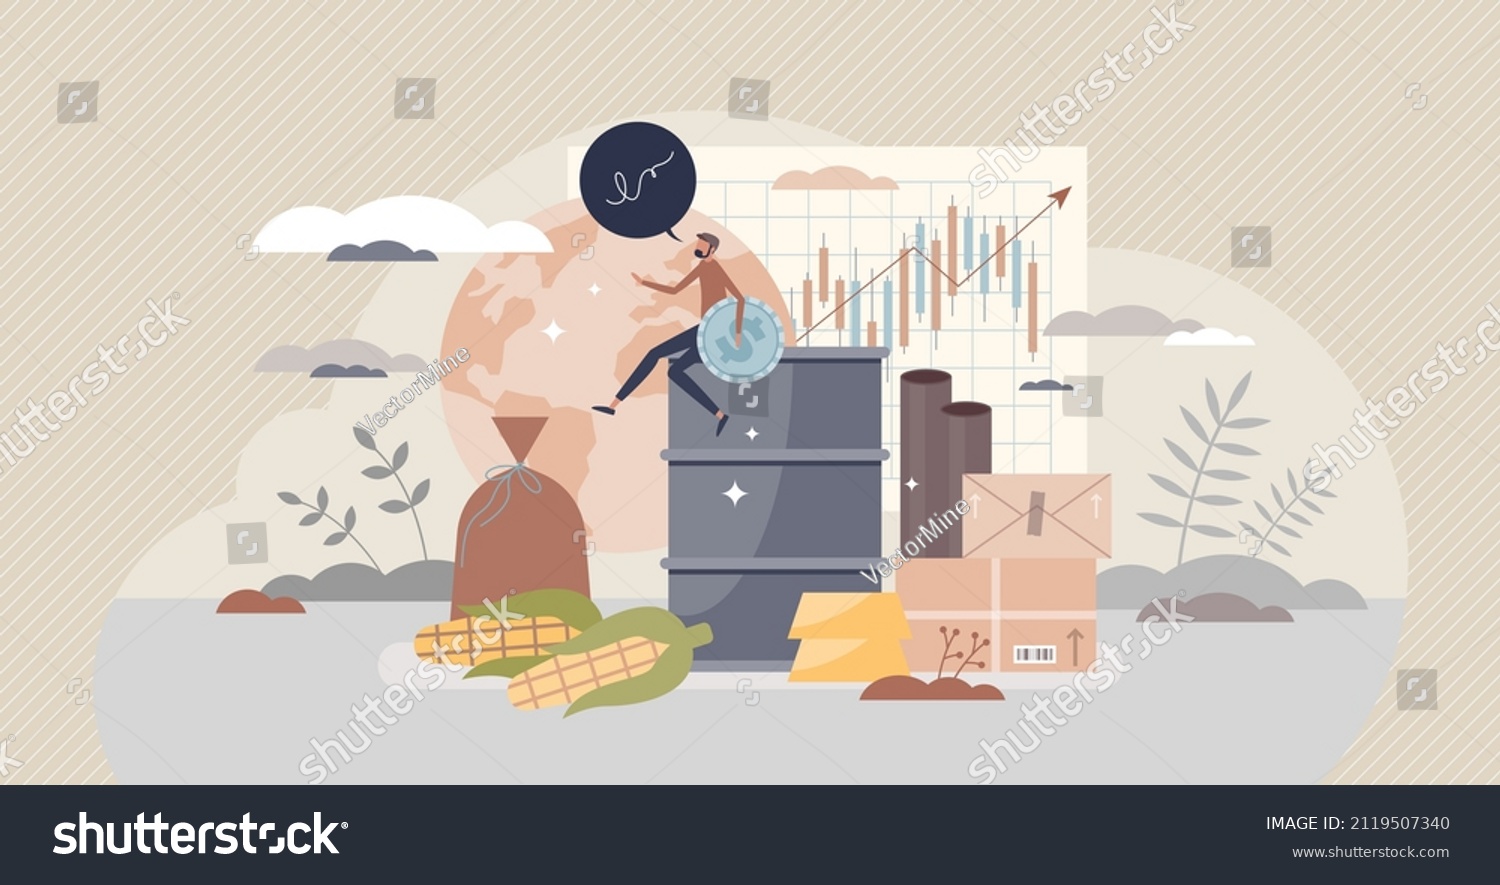 Commodities trading market as sell primary raw materials tiny person concept. Economic sector investment in goods such as gold, corn, wheat, oil barrels or gas for financial profit vector illustration #2119507340